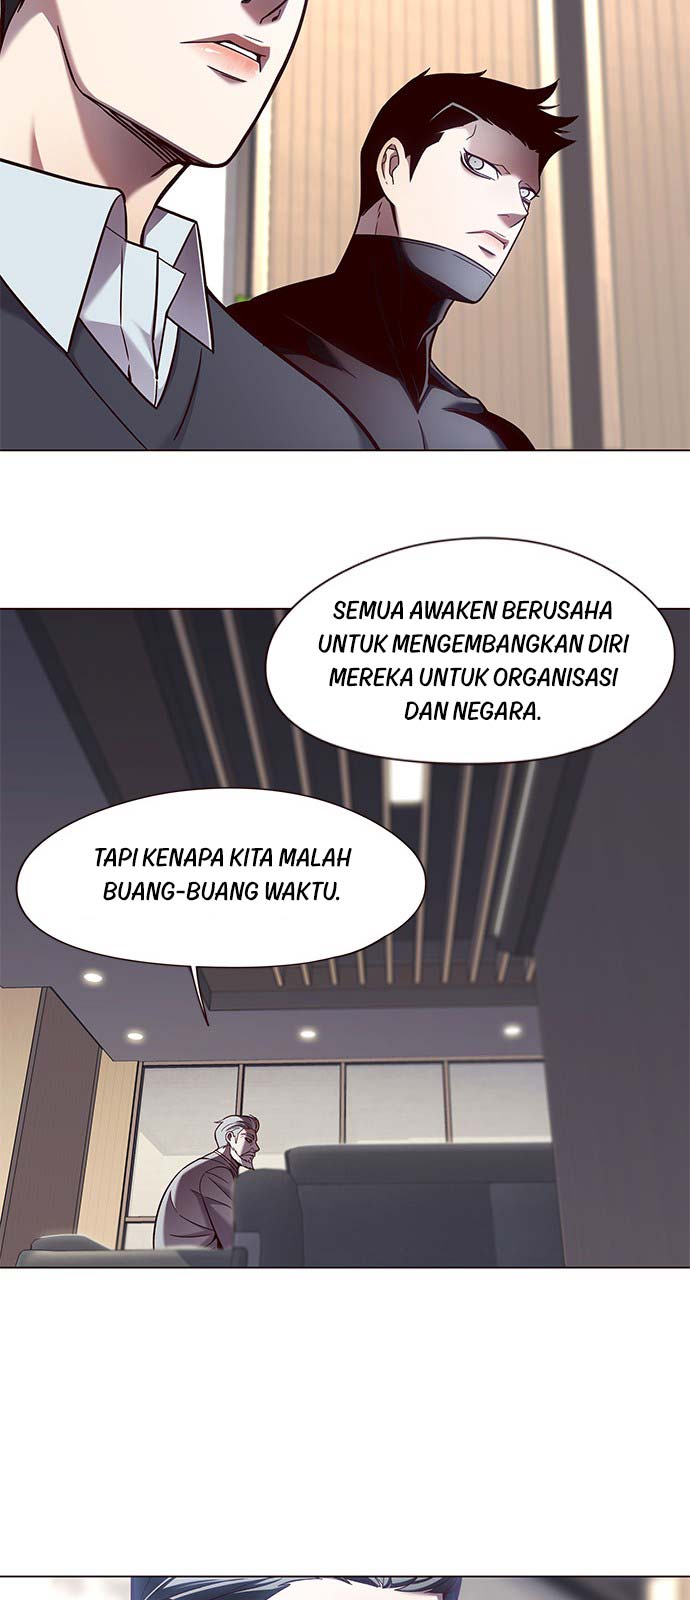 Eleceed Chapter 79